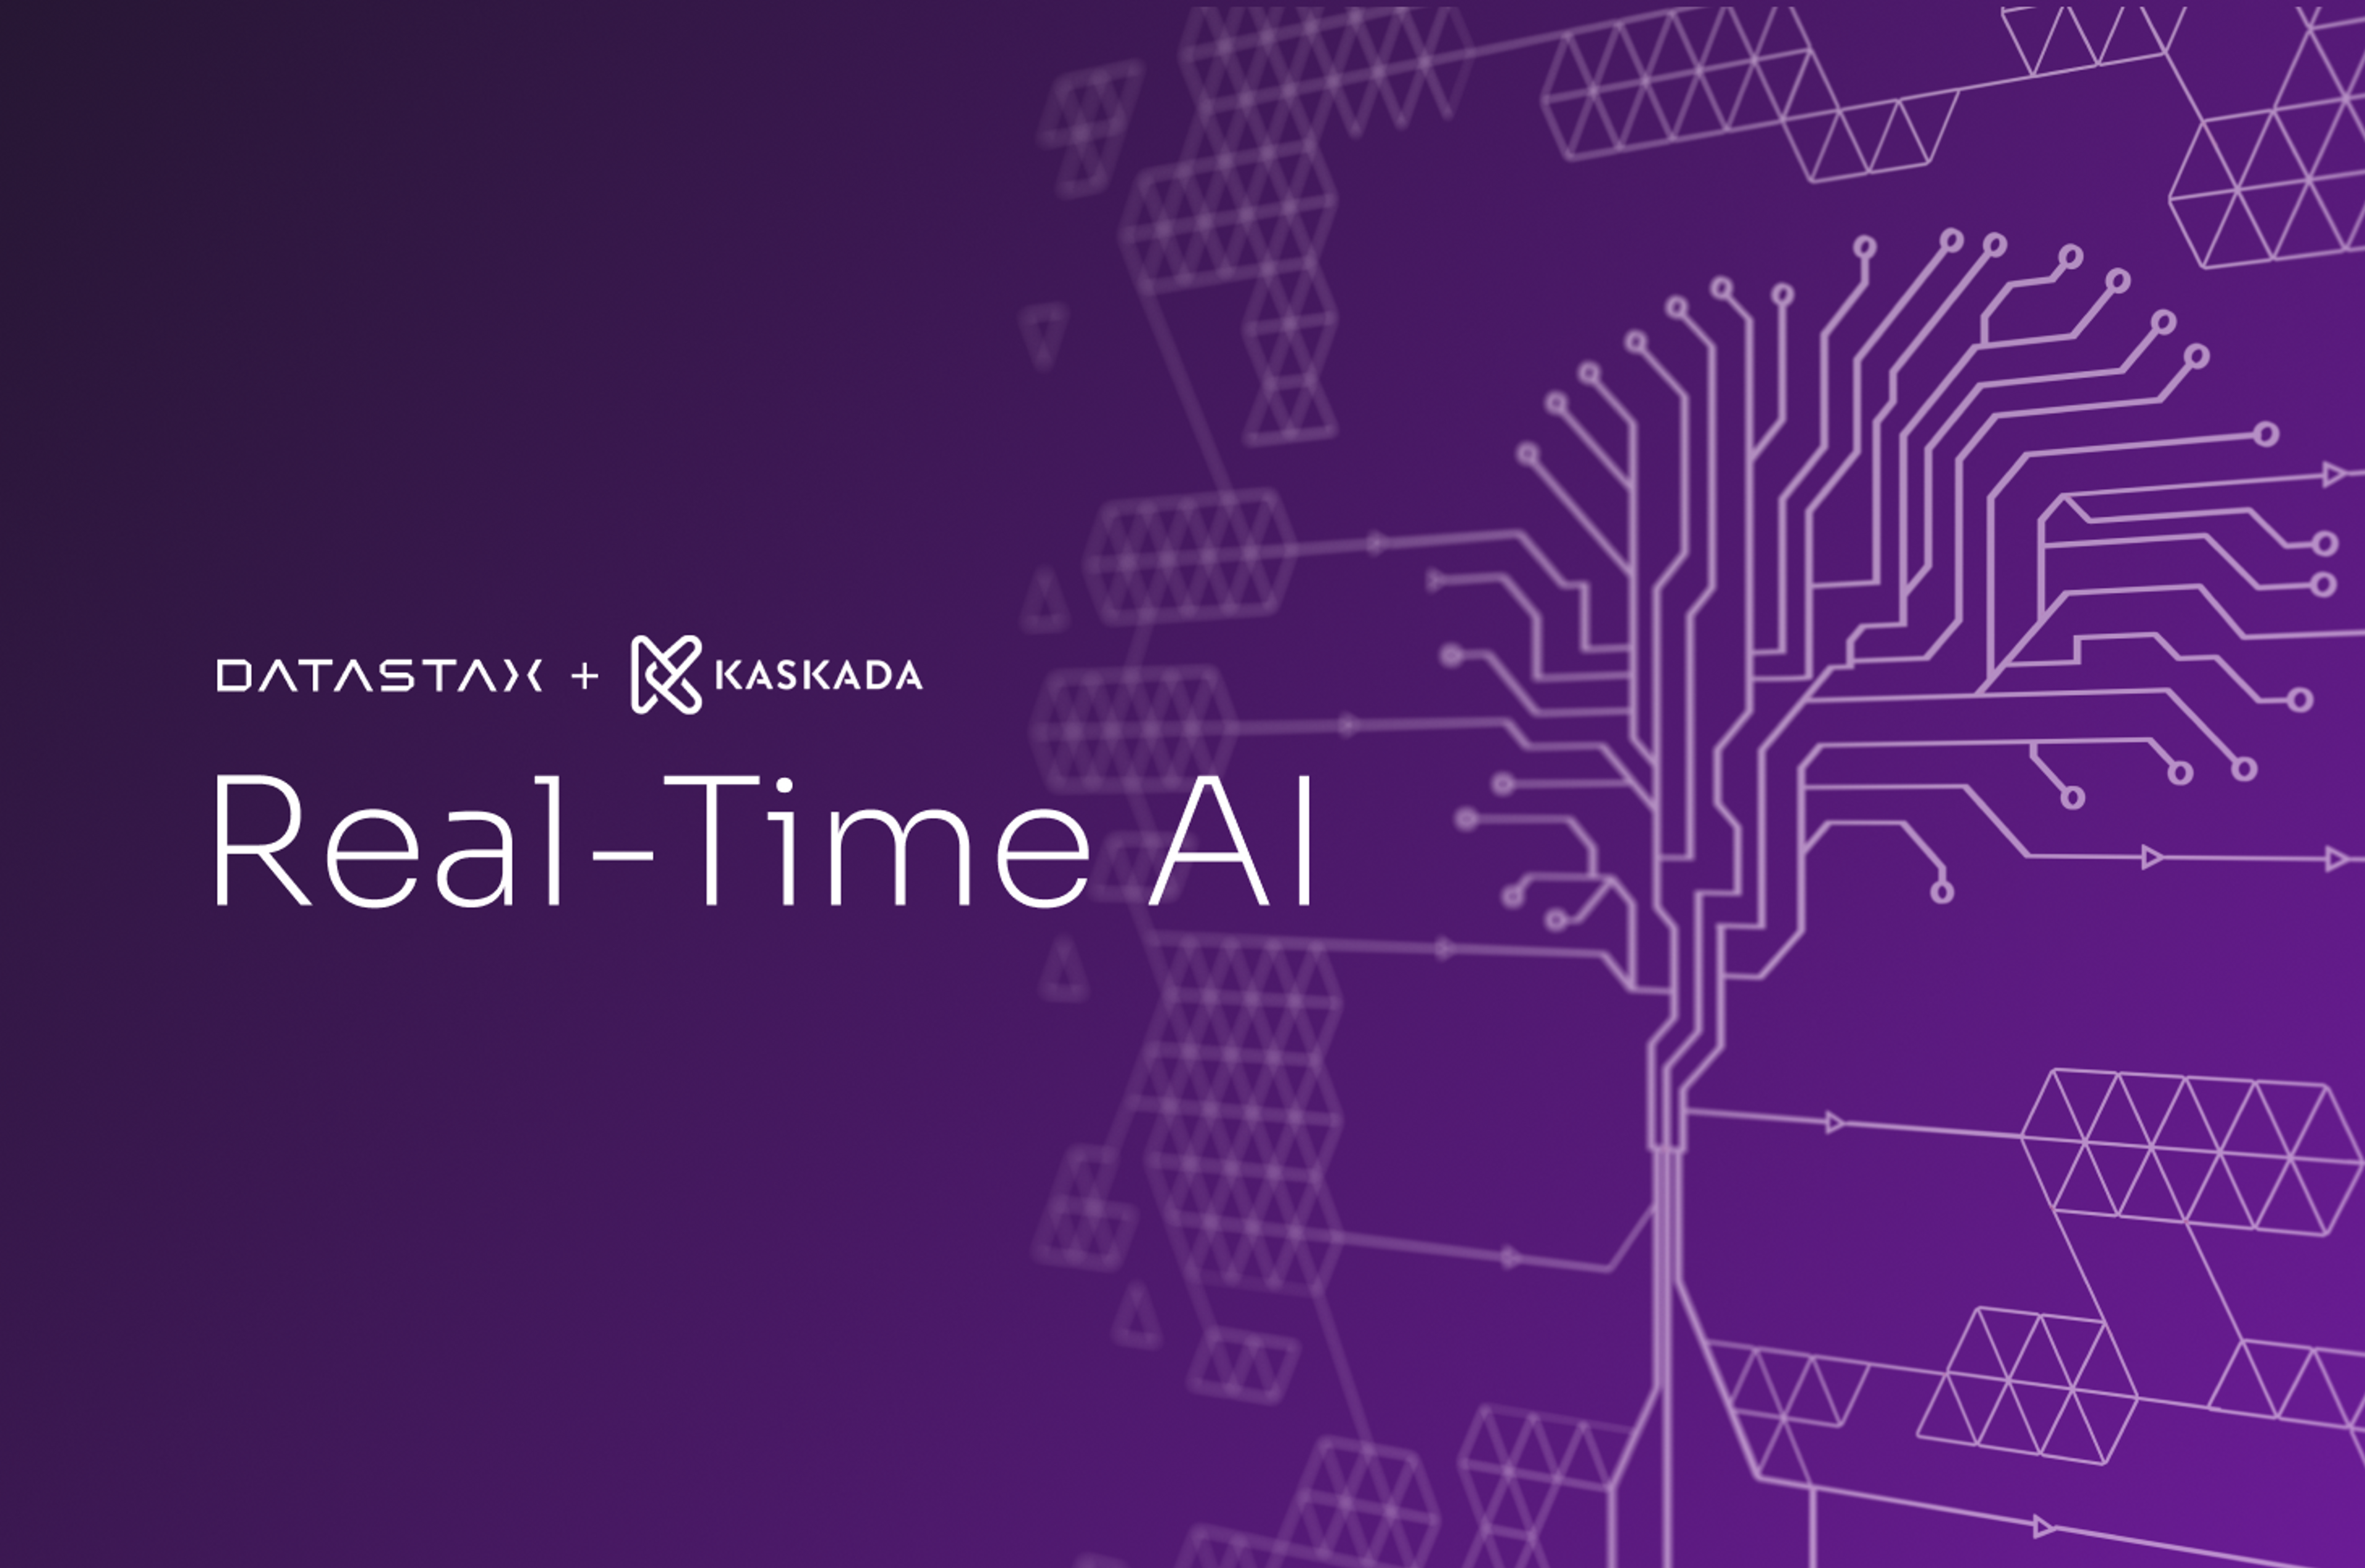 A New Mandate for DataStax: Real-Time AI for Everyone